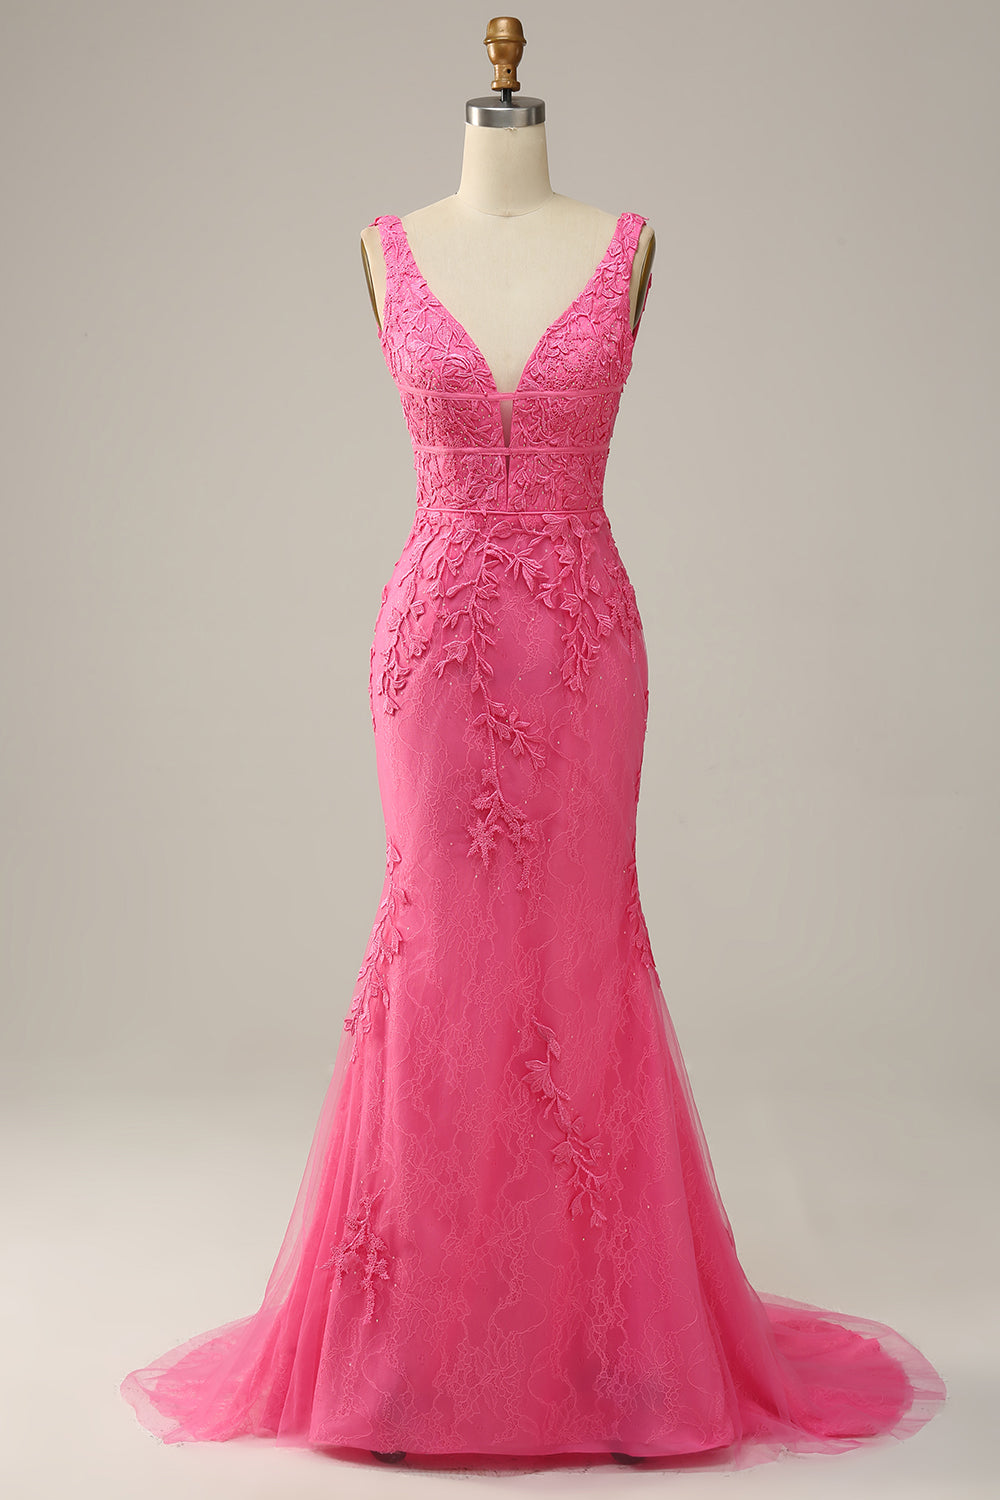 Hot Pink Mermaid Deep V Neck Long Prom Dress with Open Back